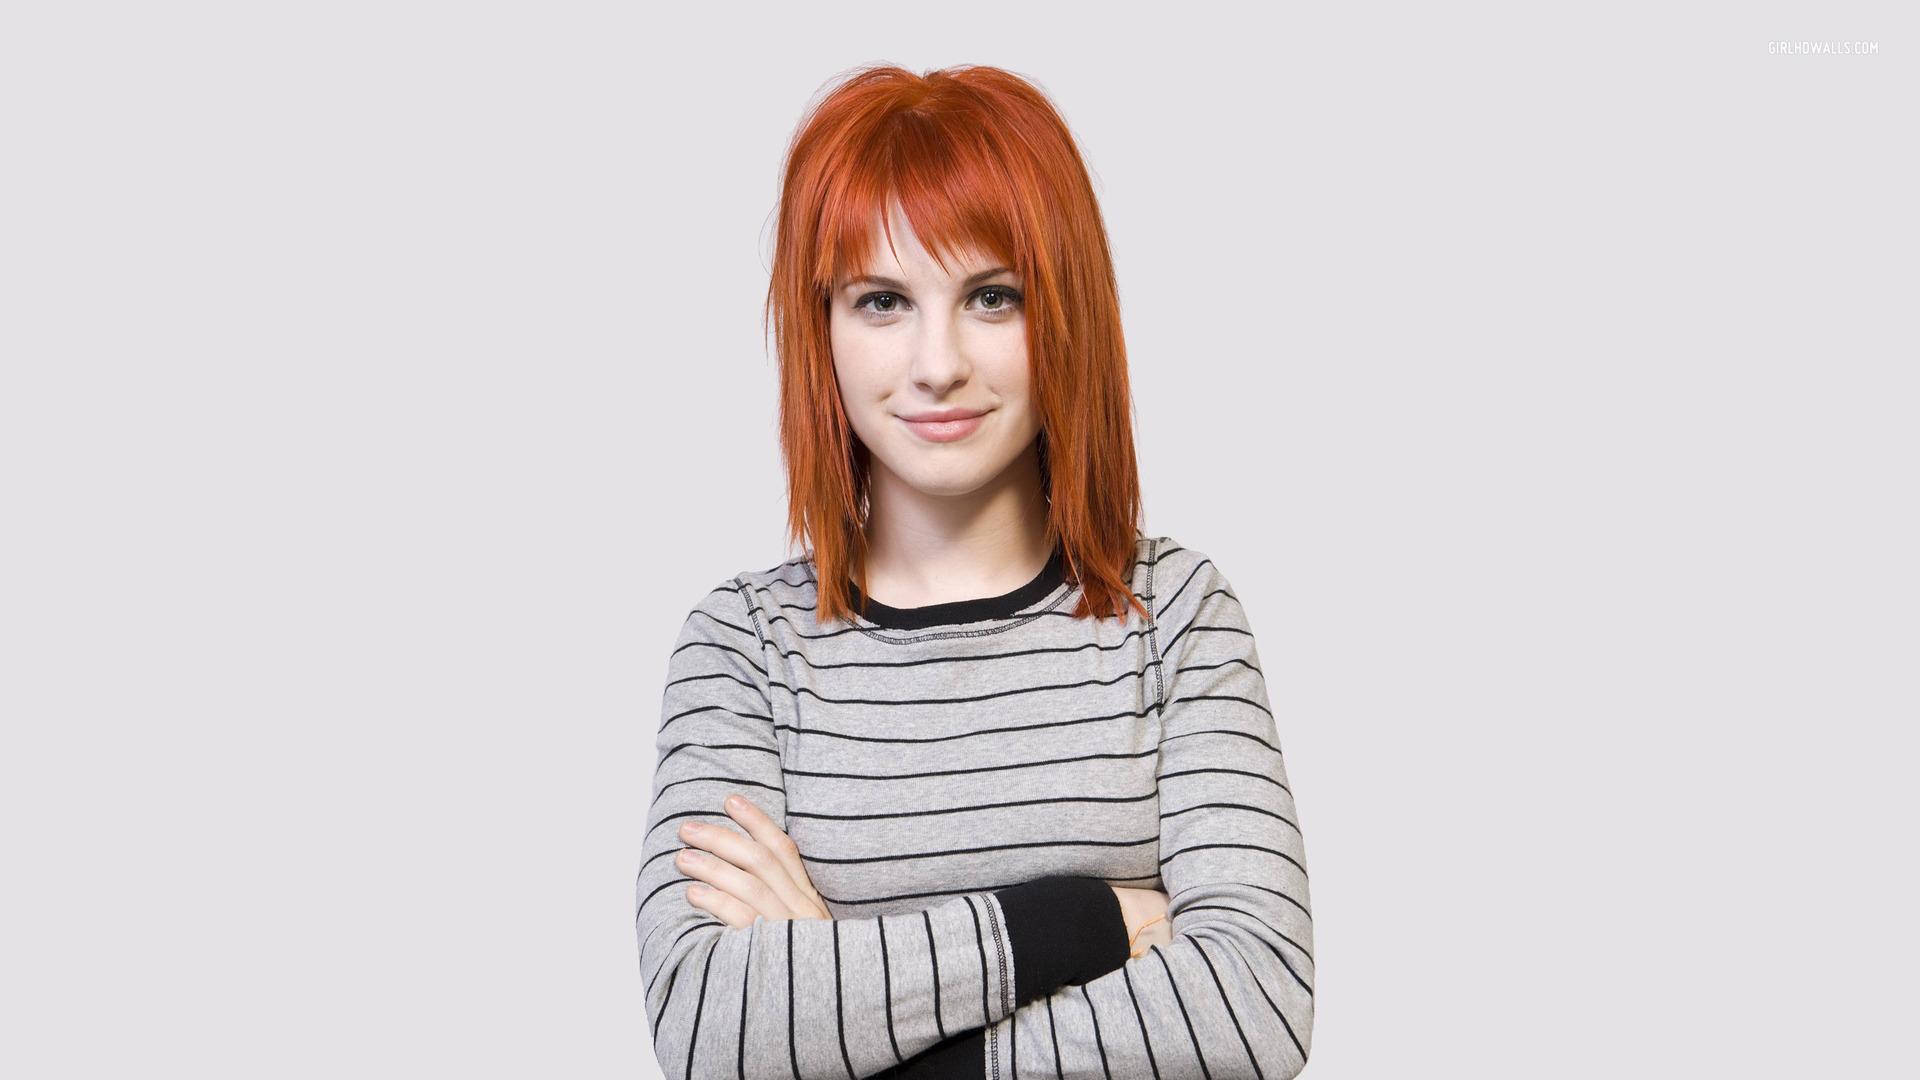 Terrific Hayley Williams Wallpaper Full HD Pictures